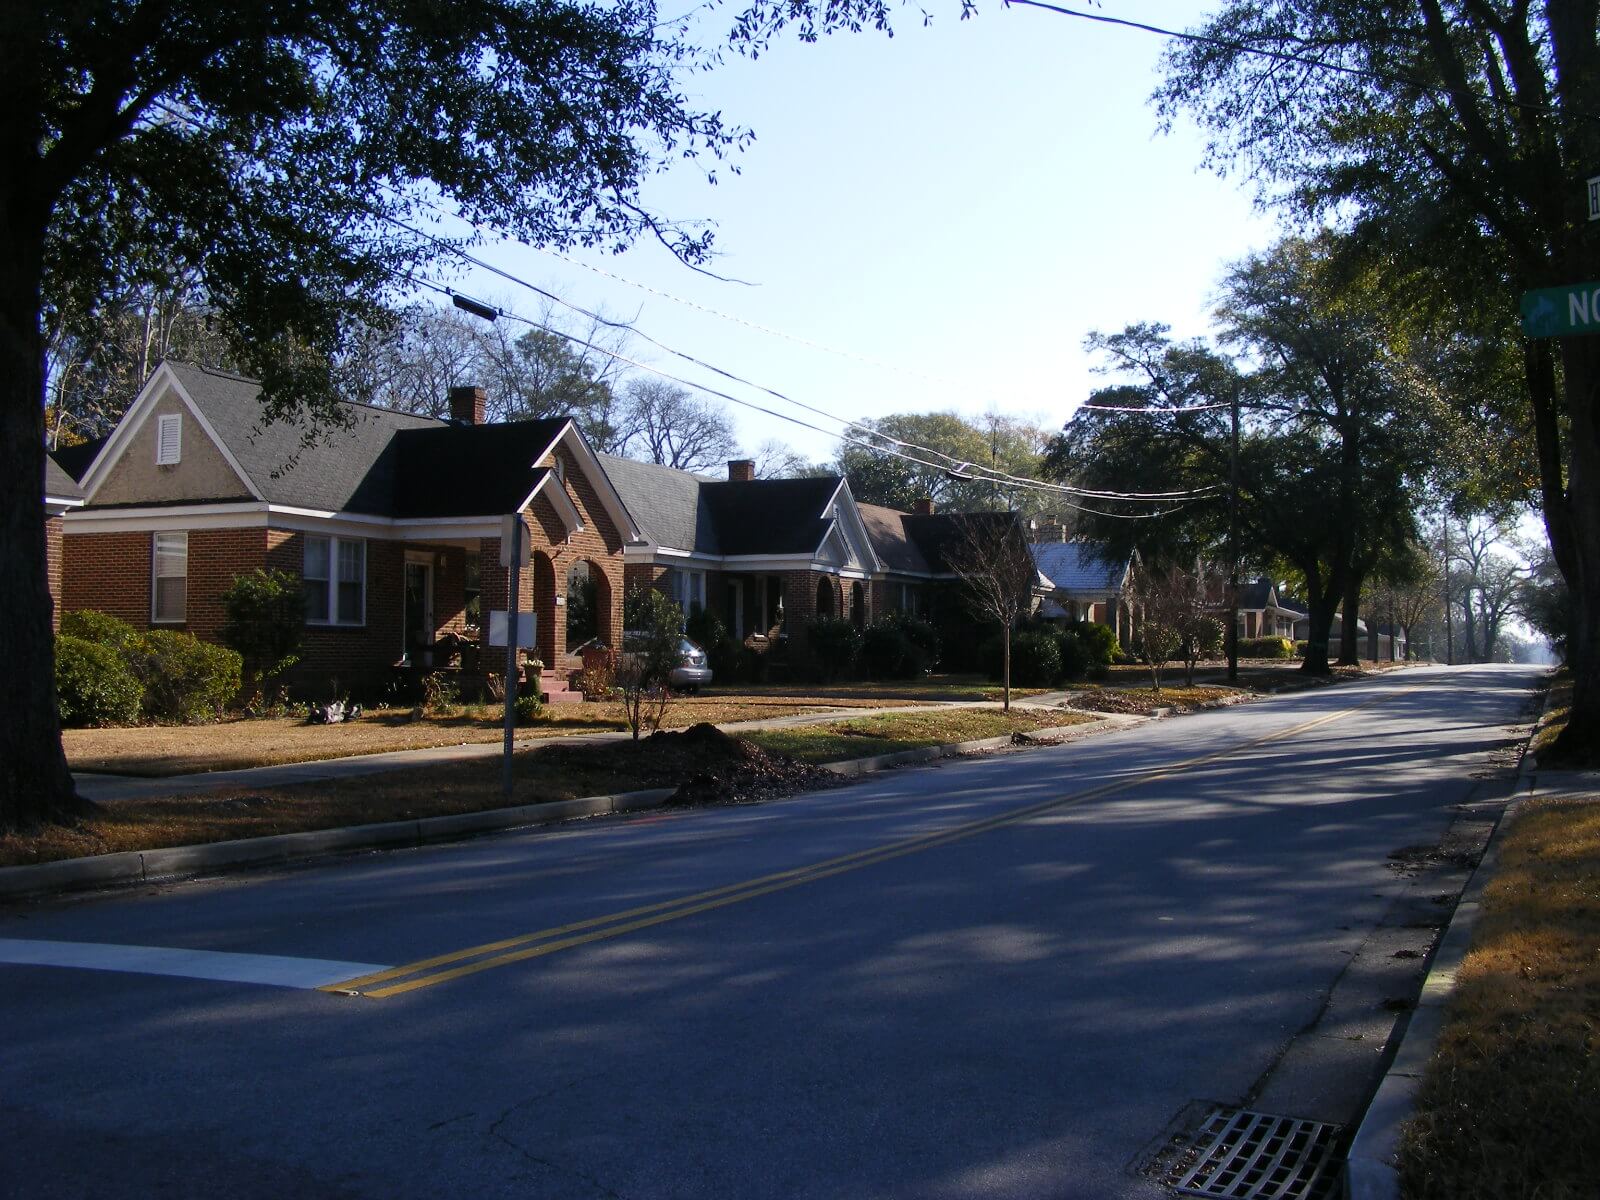 Photograph of a street with brick homes